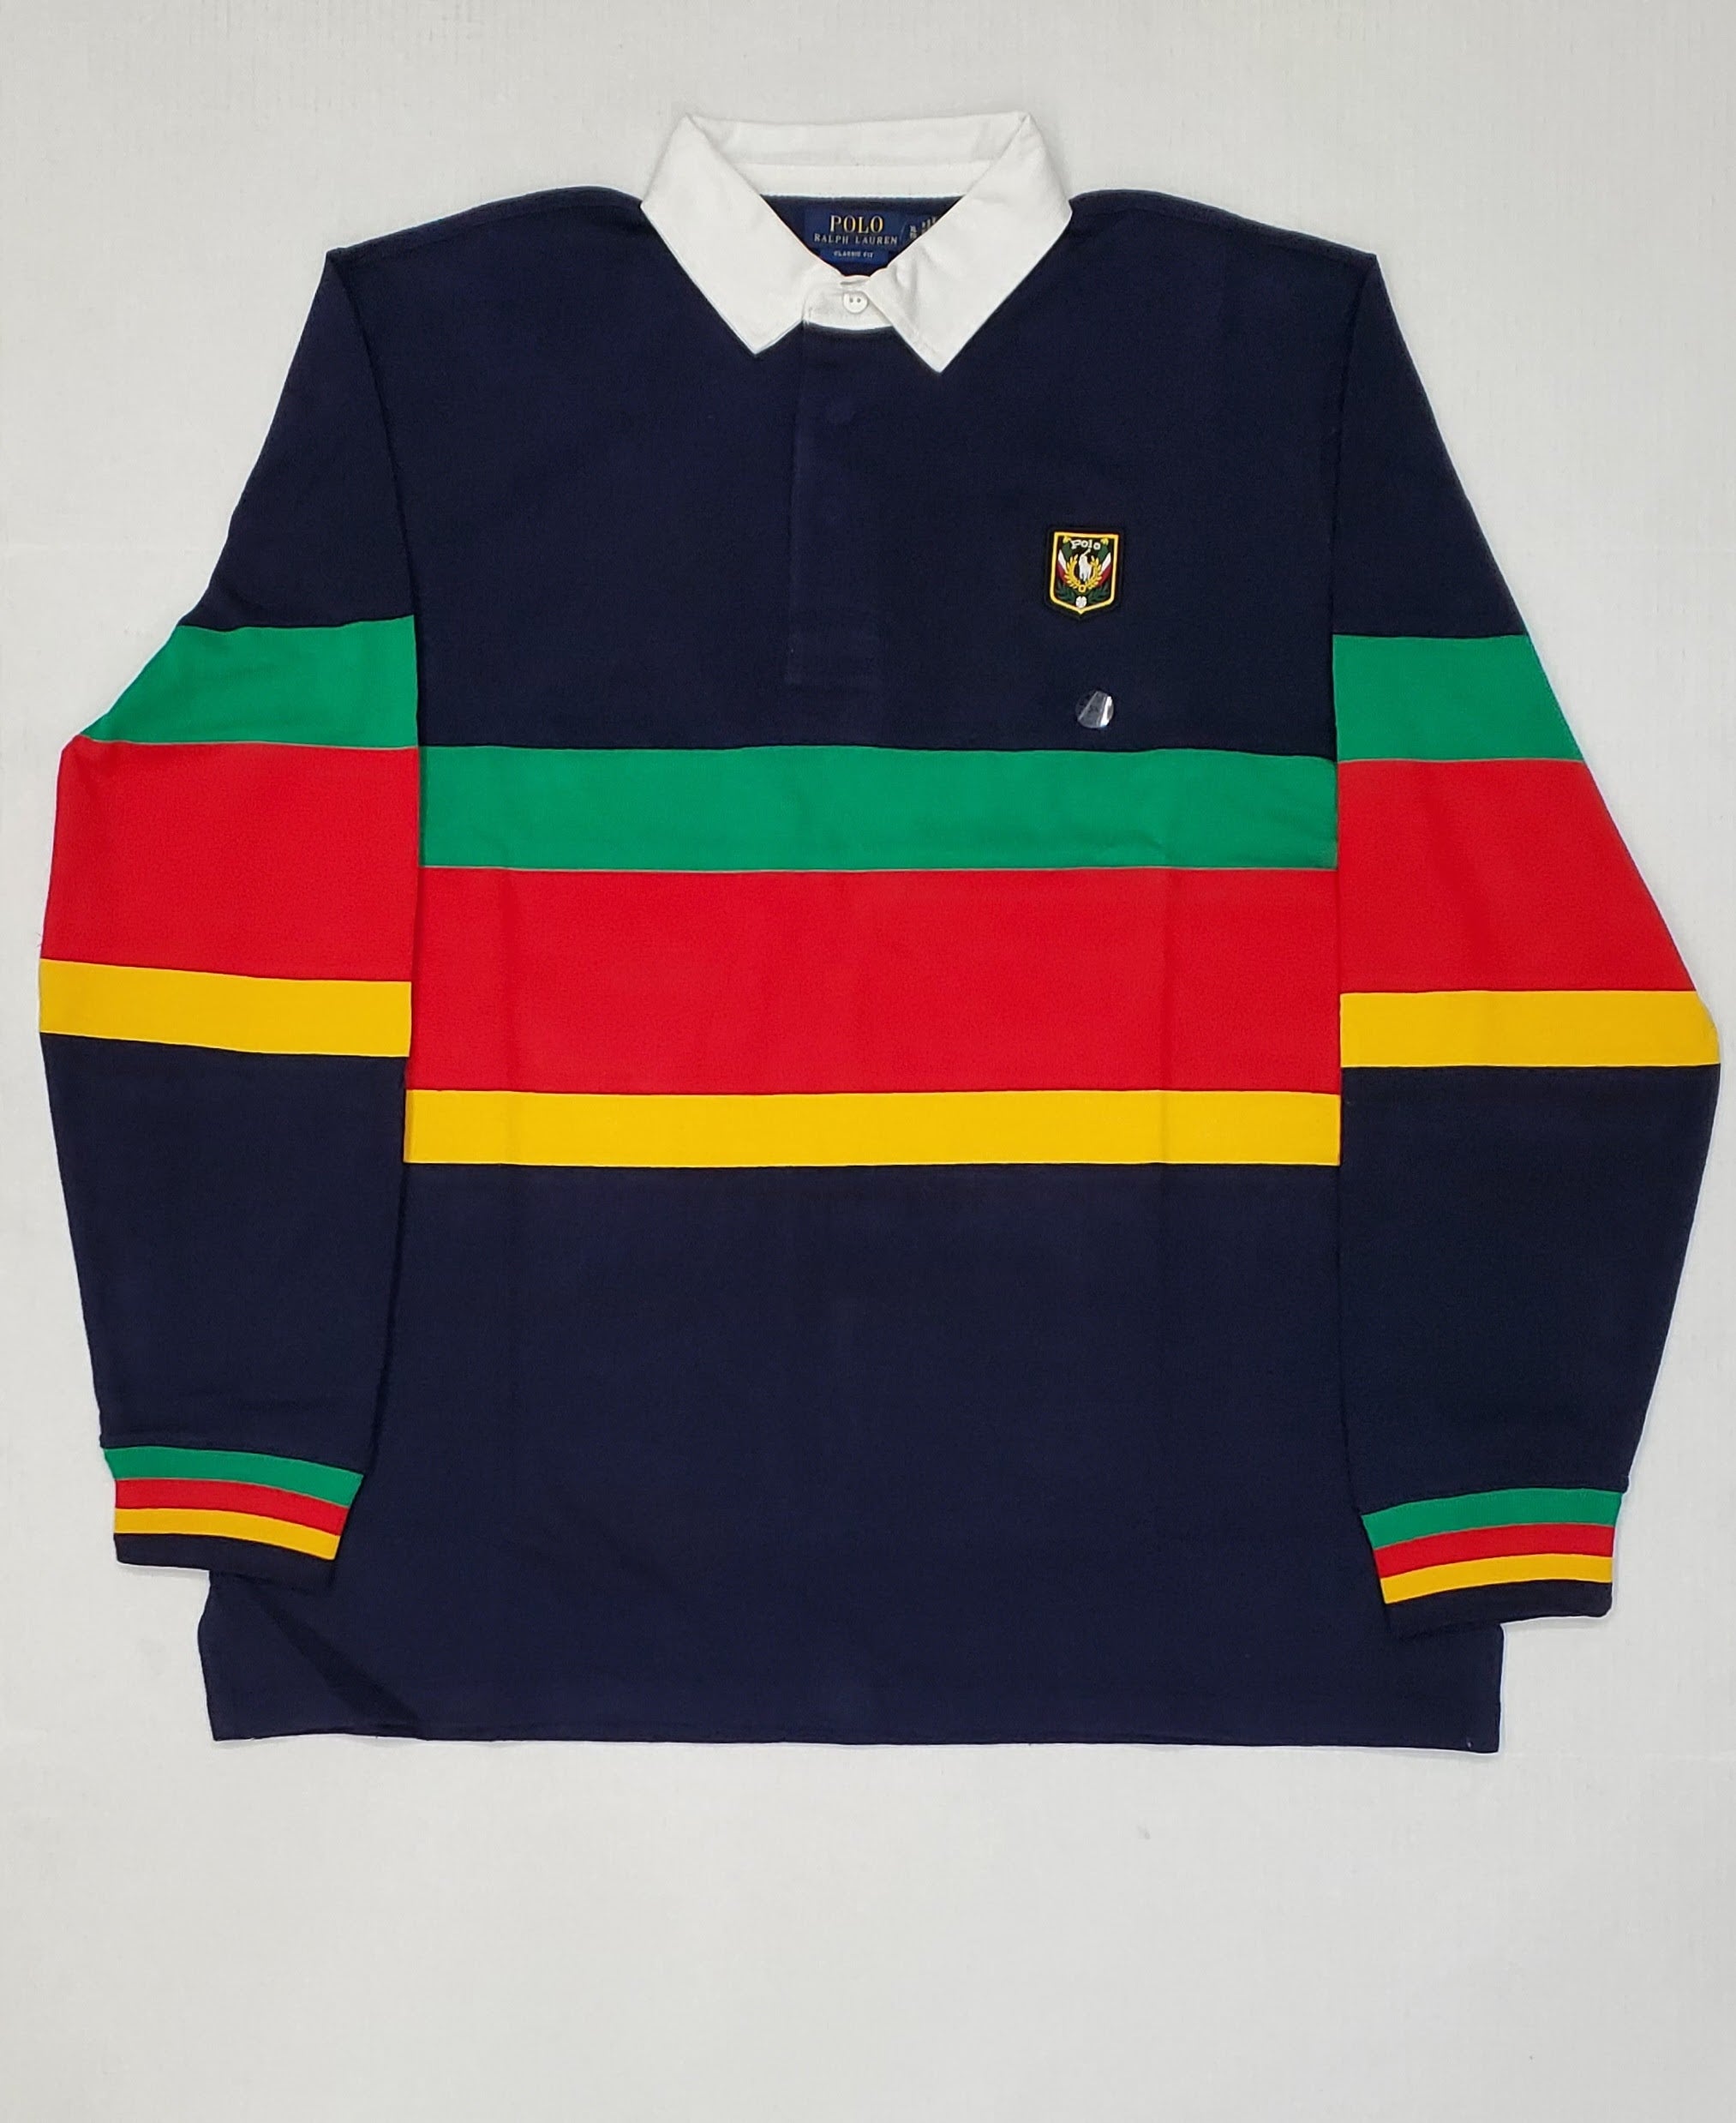 Nwt Polo Ralph Lauren Navy/Yellow/Green/ Red Uni Classic Fit 